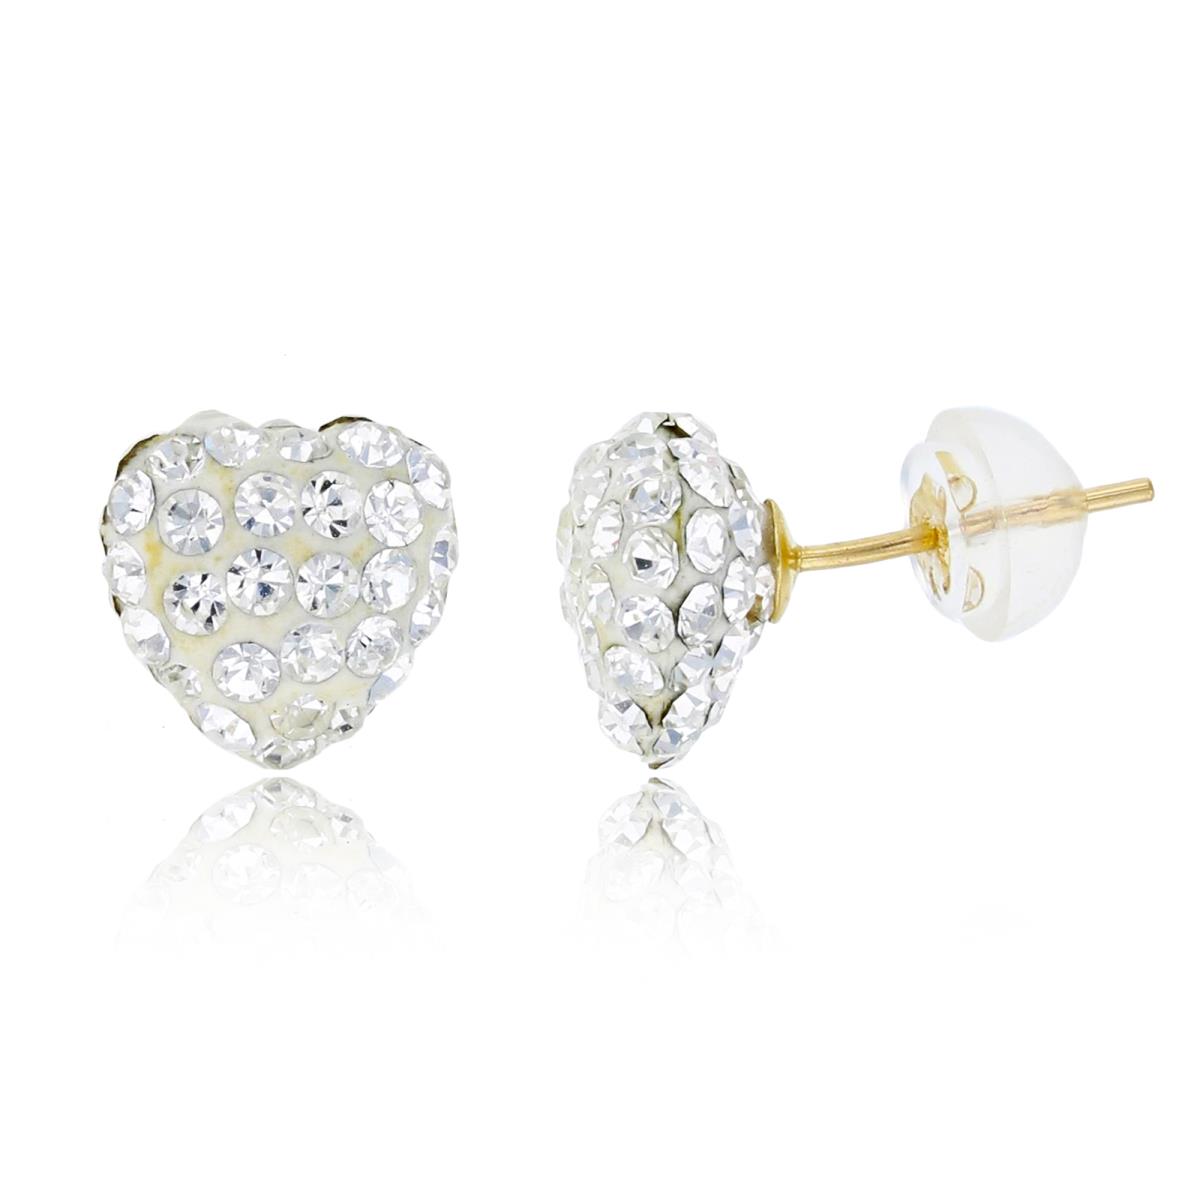 14K Yellow Gold 8x8mm White Crystals Heart Stud Earring